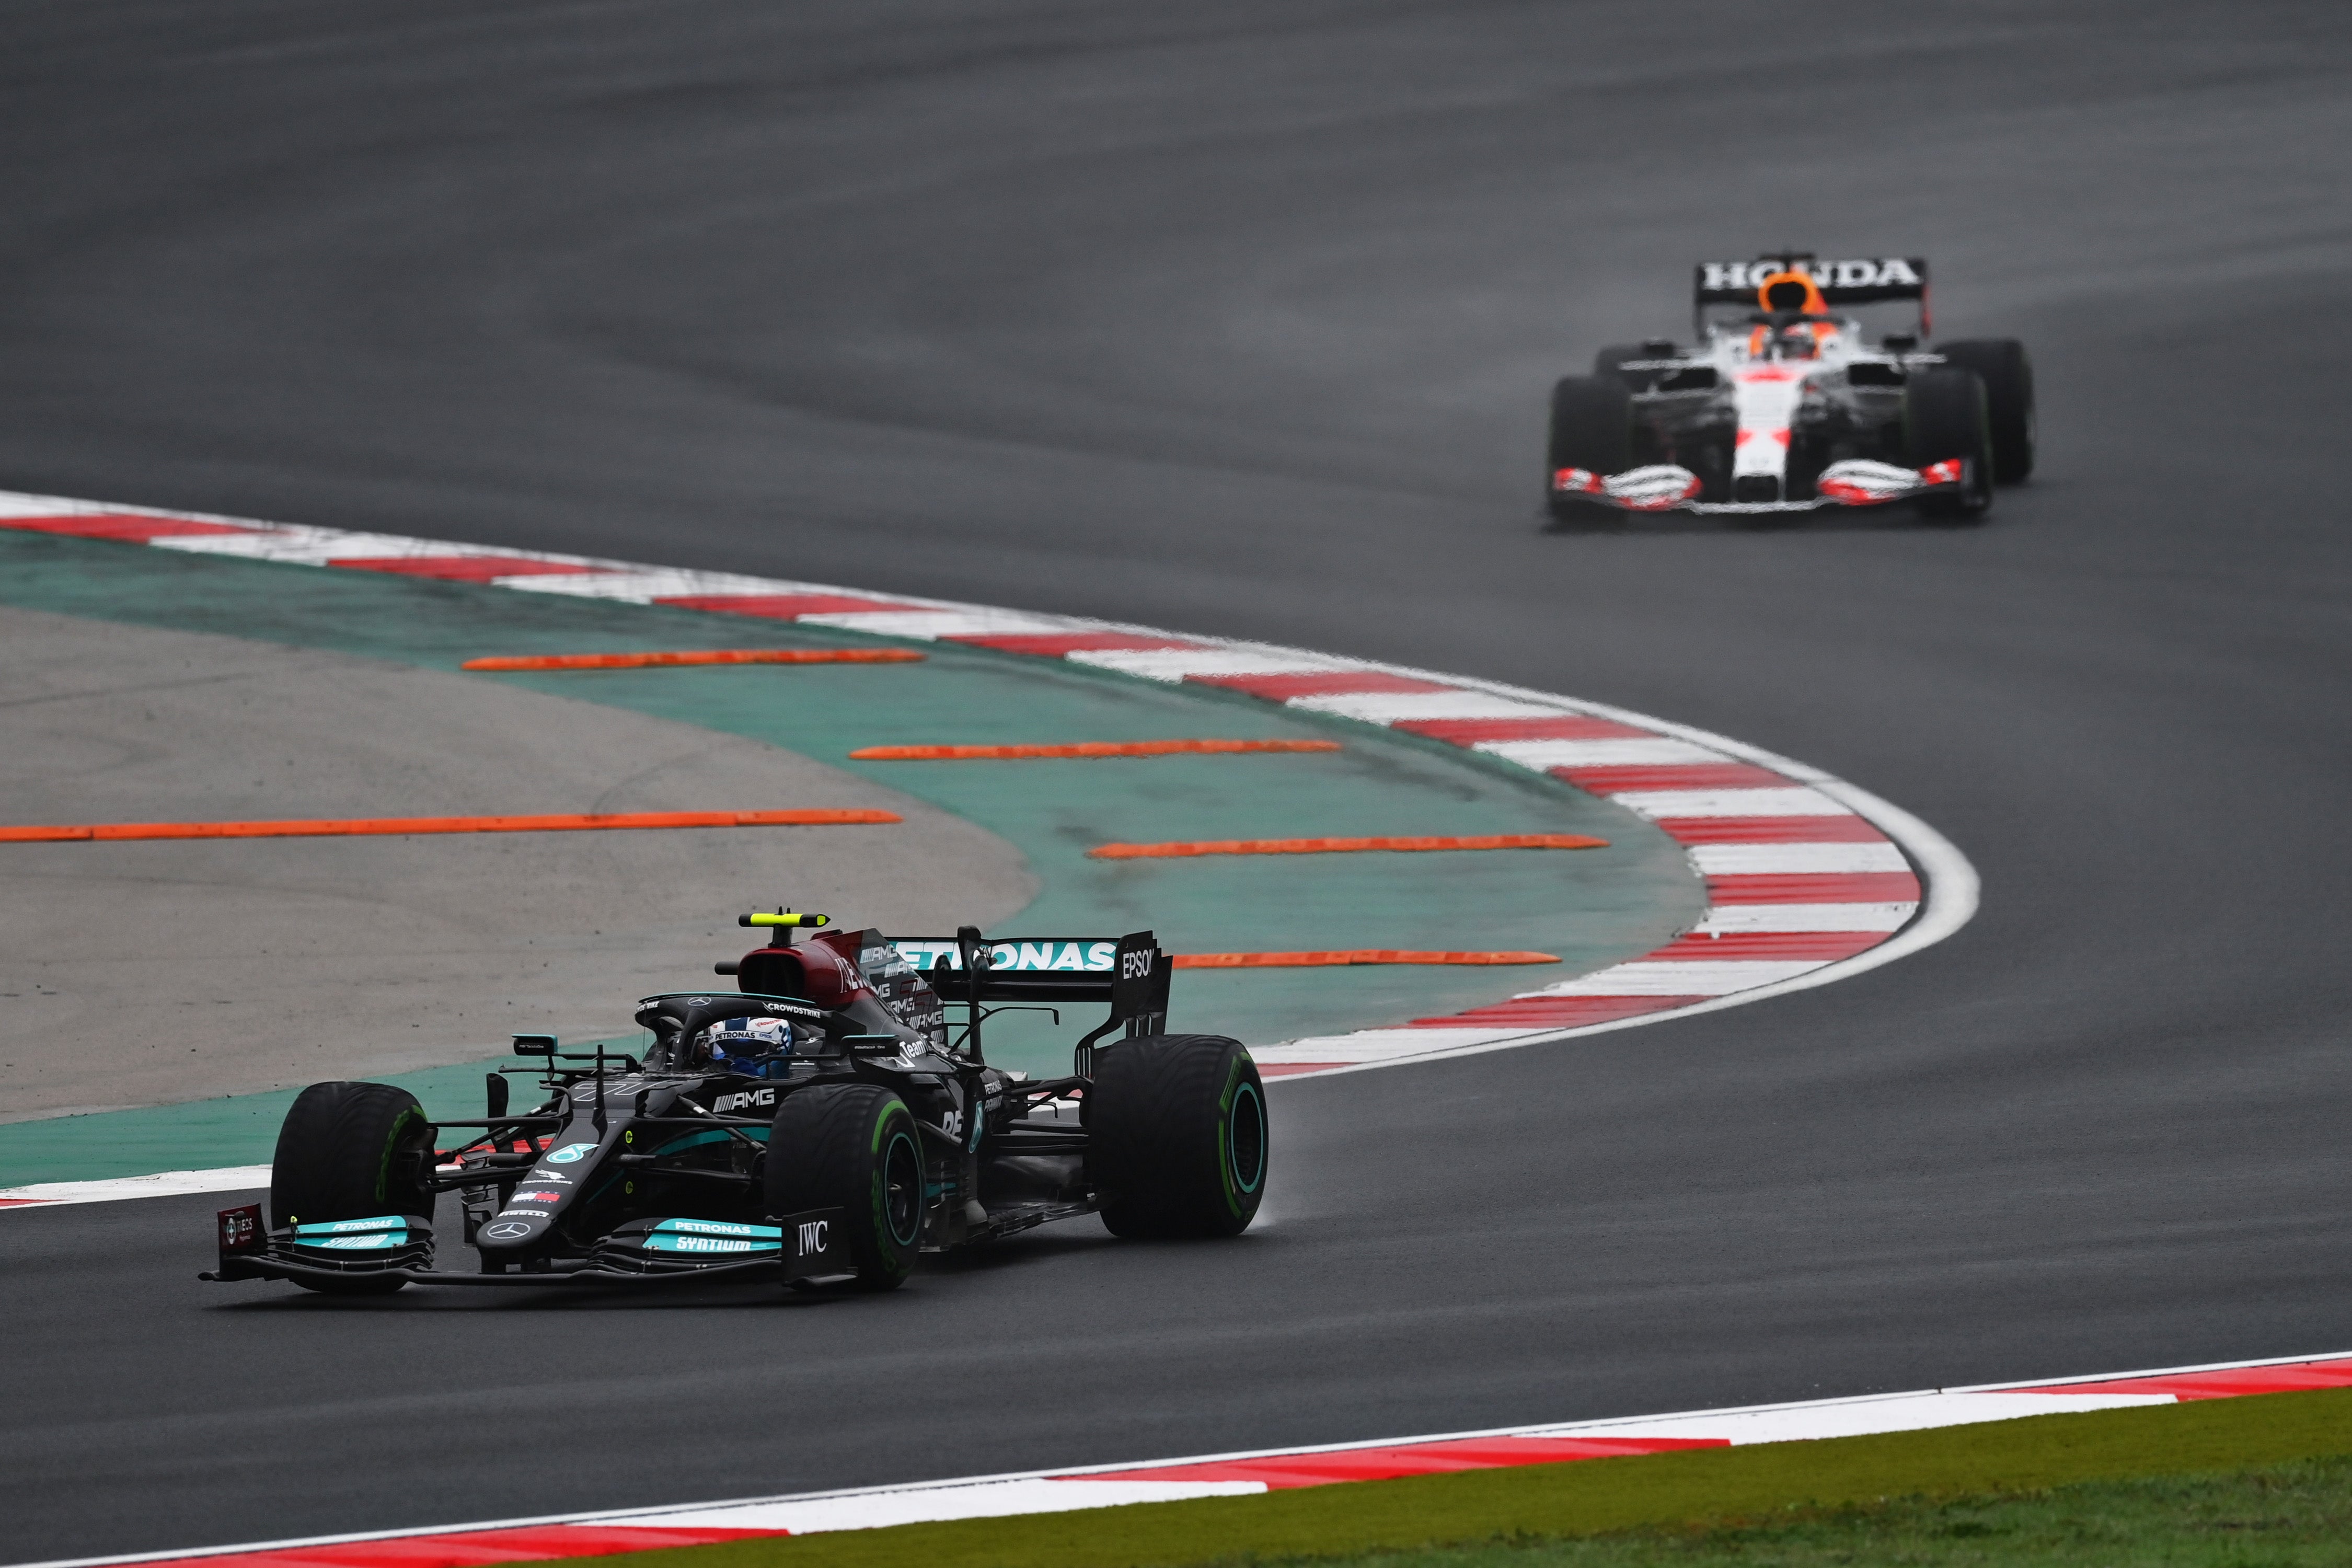 Valtteri Bottas of Mercedes beat Max Verstappen of Red Bull to the win in Istanbul